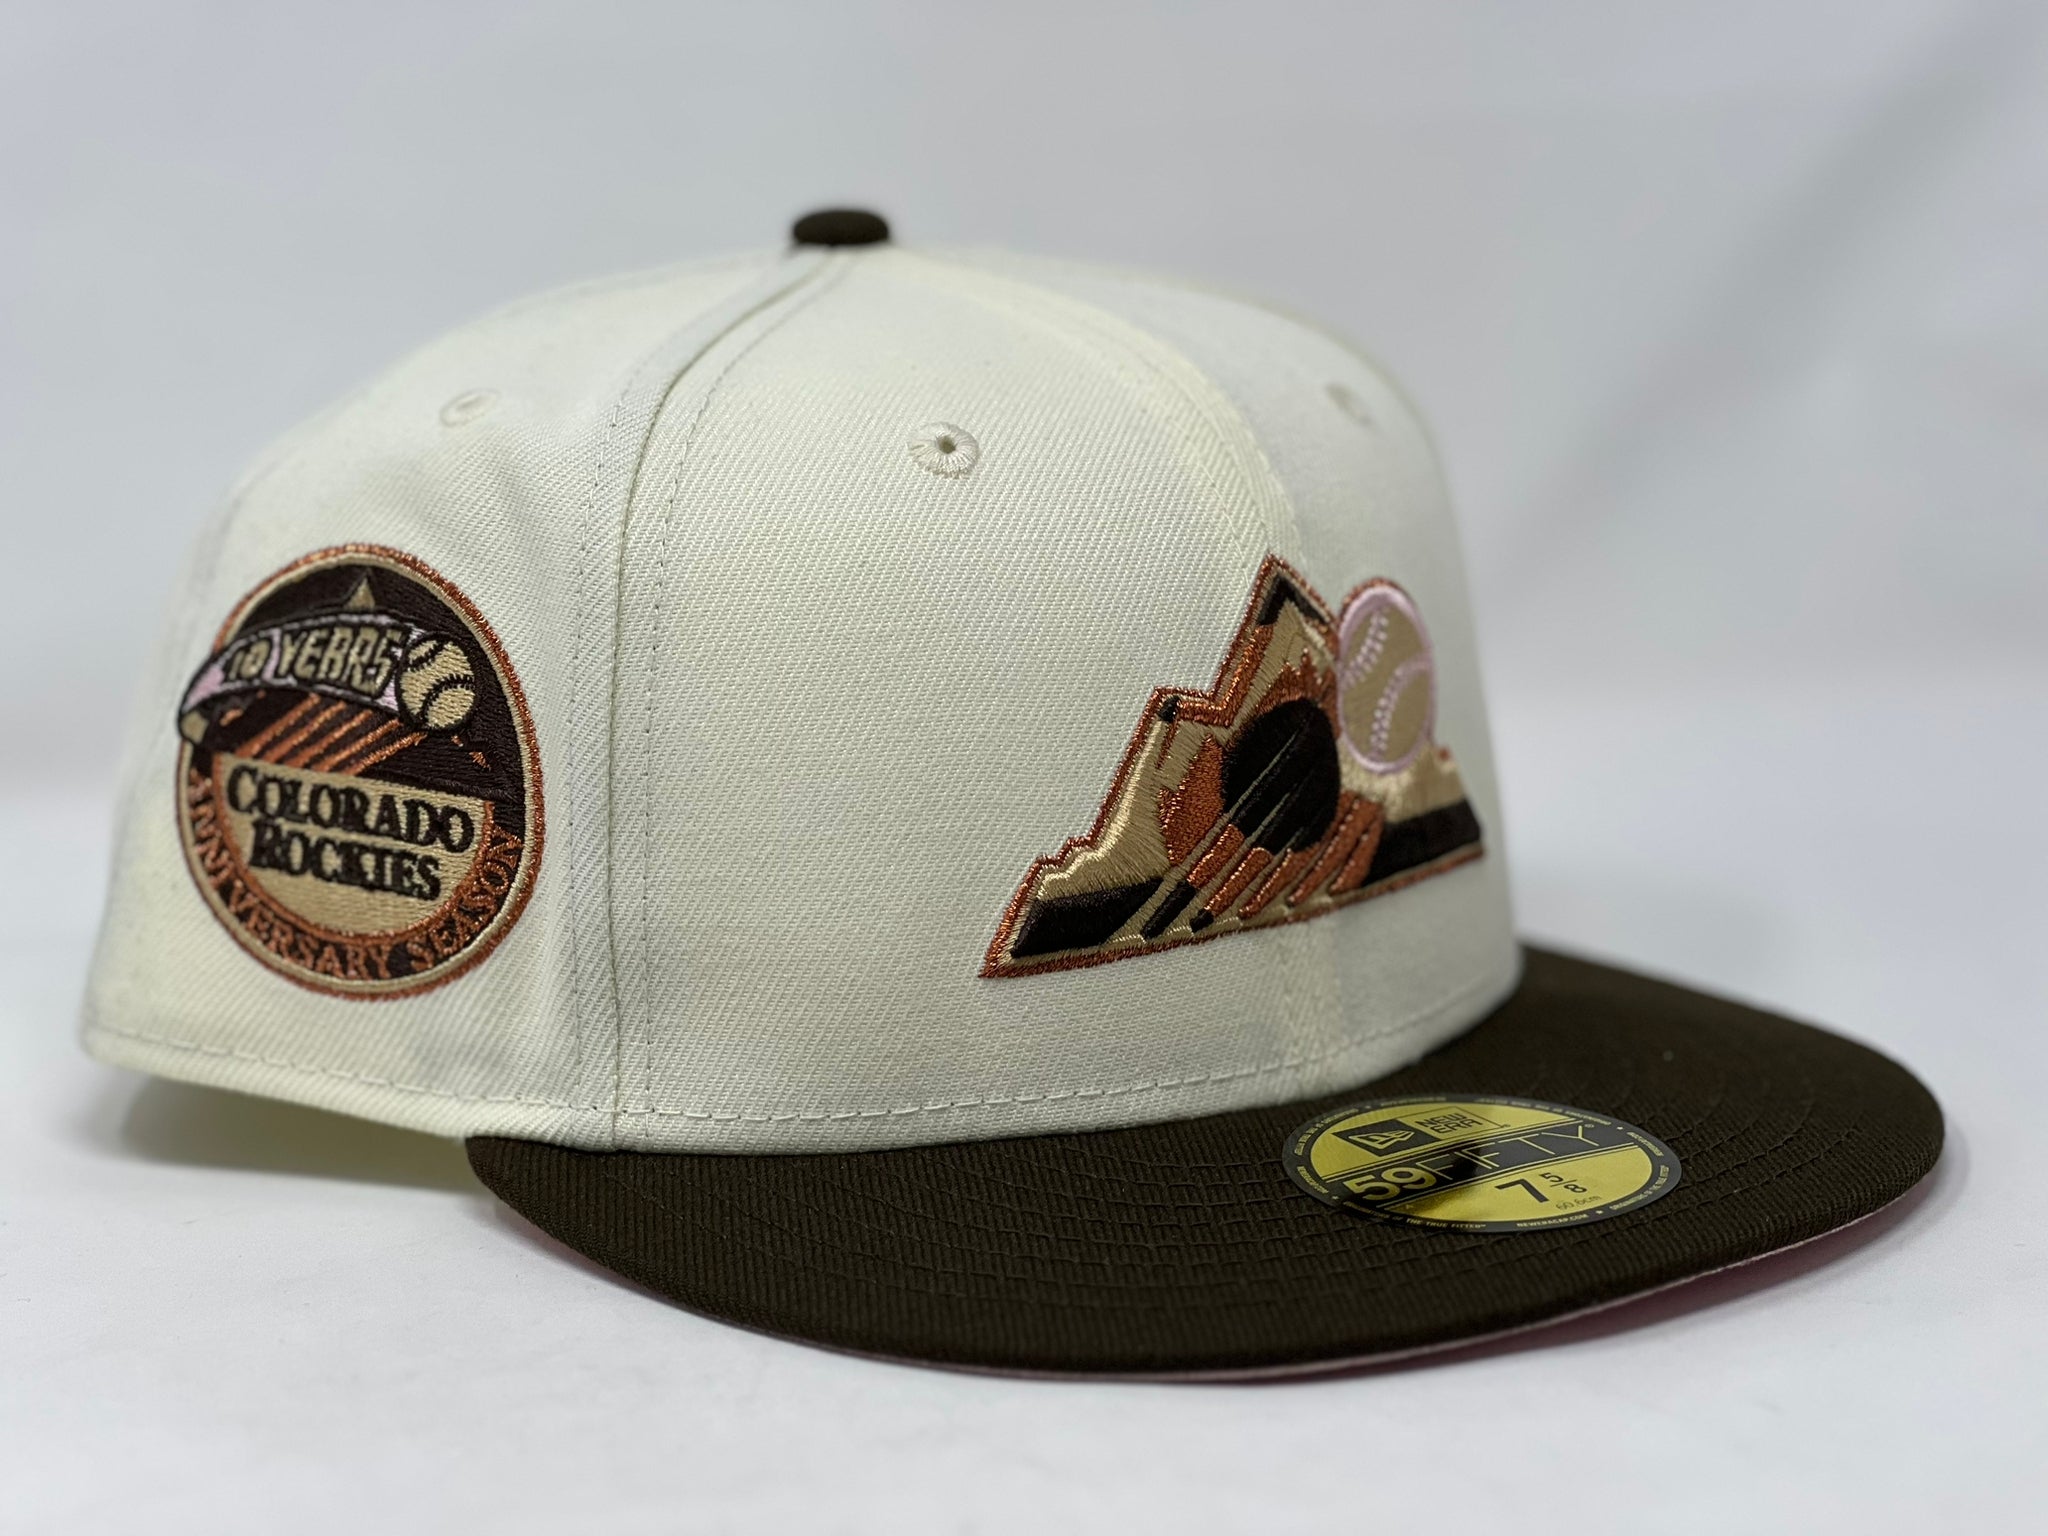 New Era Colorado Rockies 10th Anniversary Pinstripe Heroes Elite Edition  59Fifty Fitted Hat, EXCLUSIVE HATS, CAPS